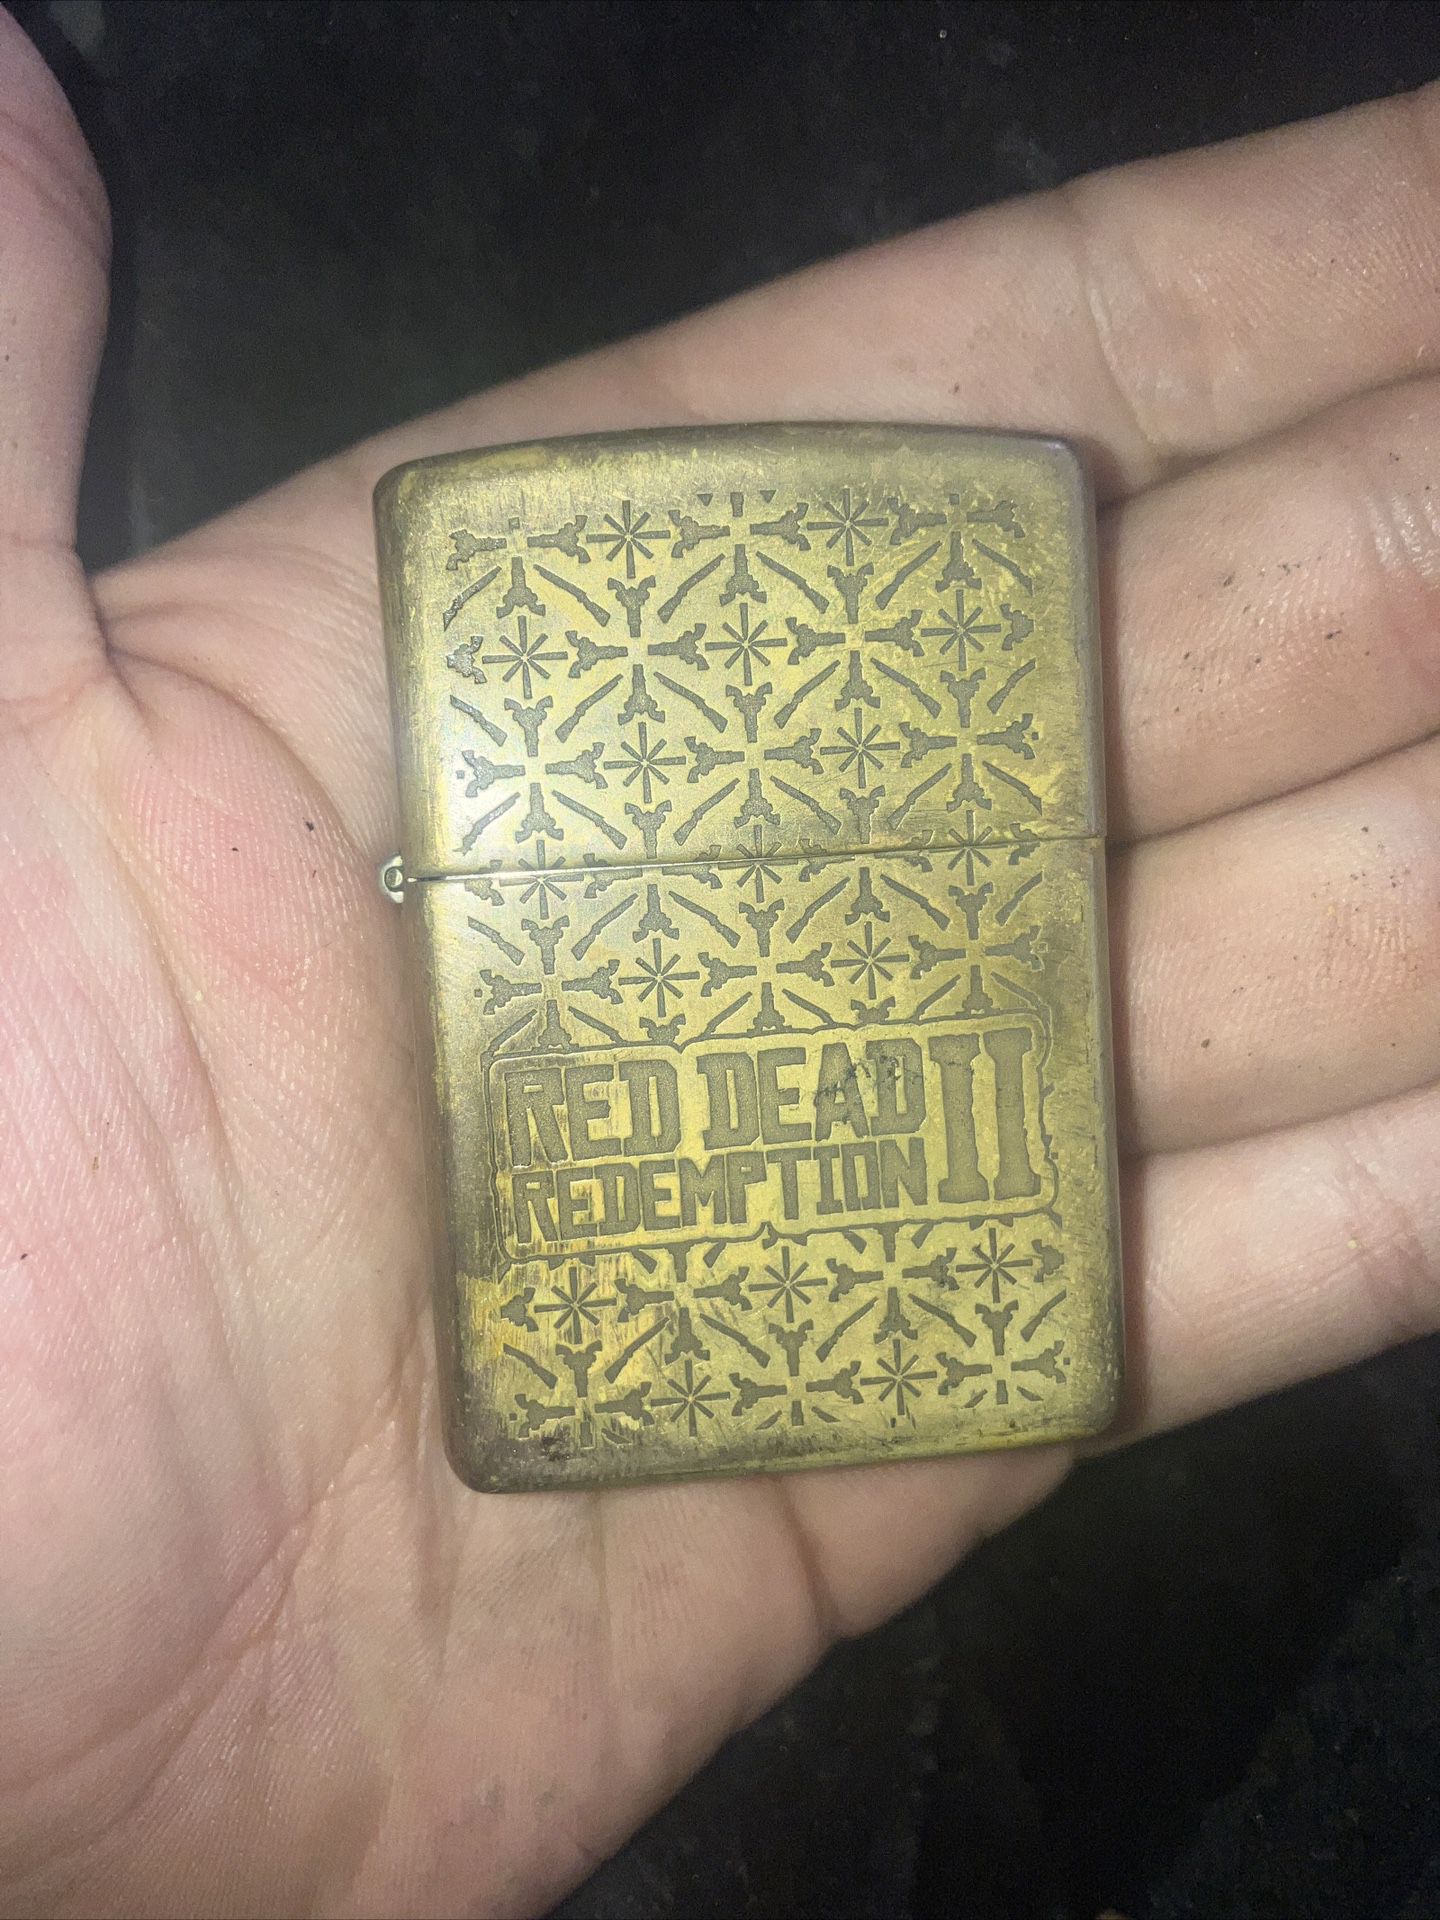 Red Dead Redemption 2 Collectible Zippo Lighter